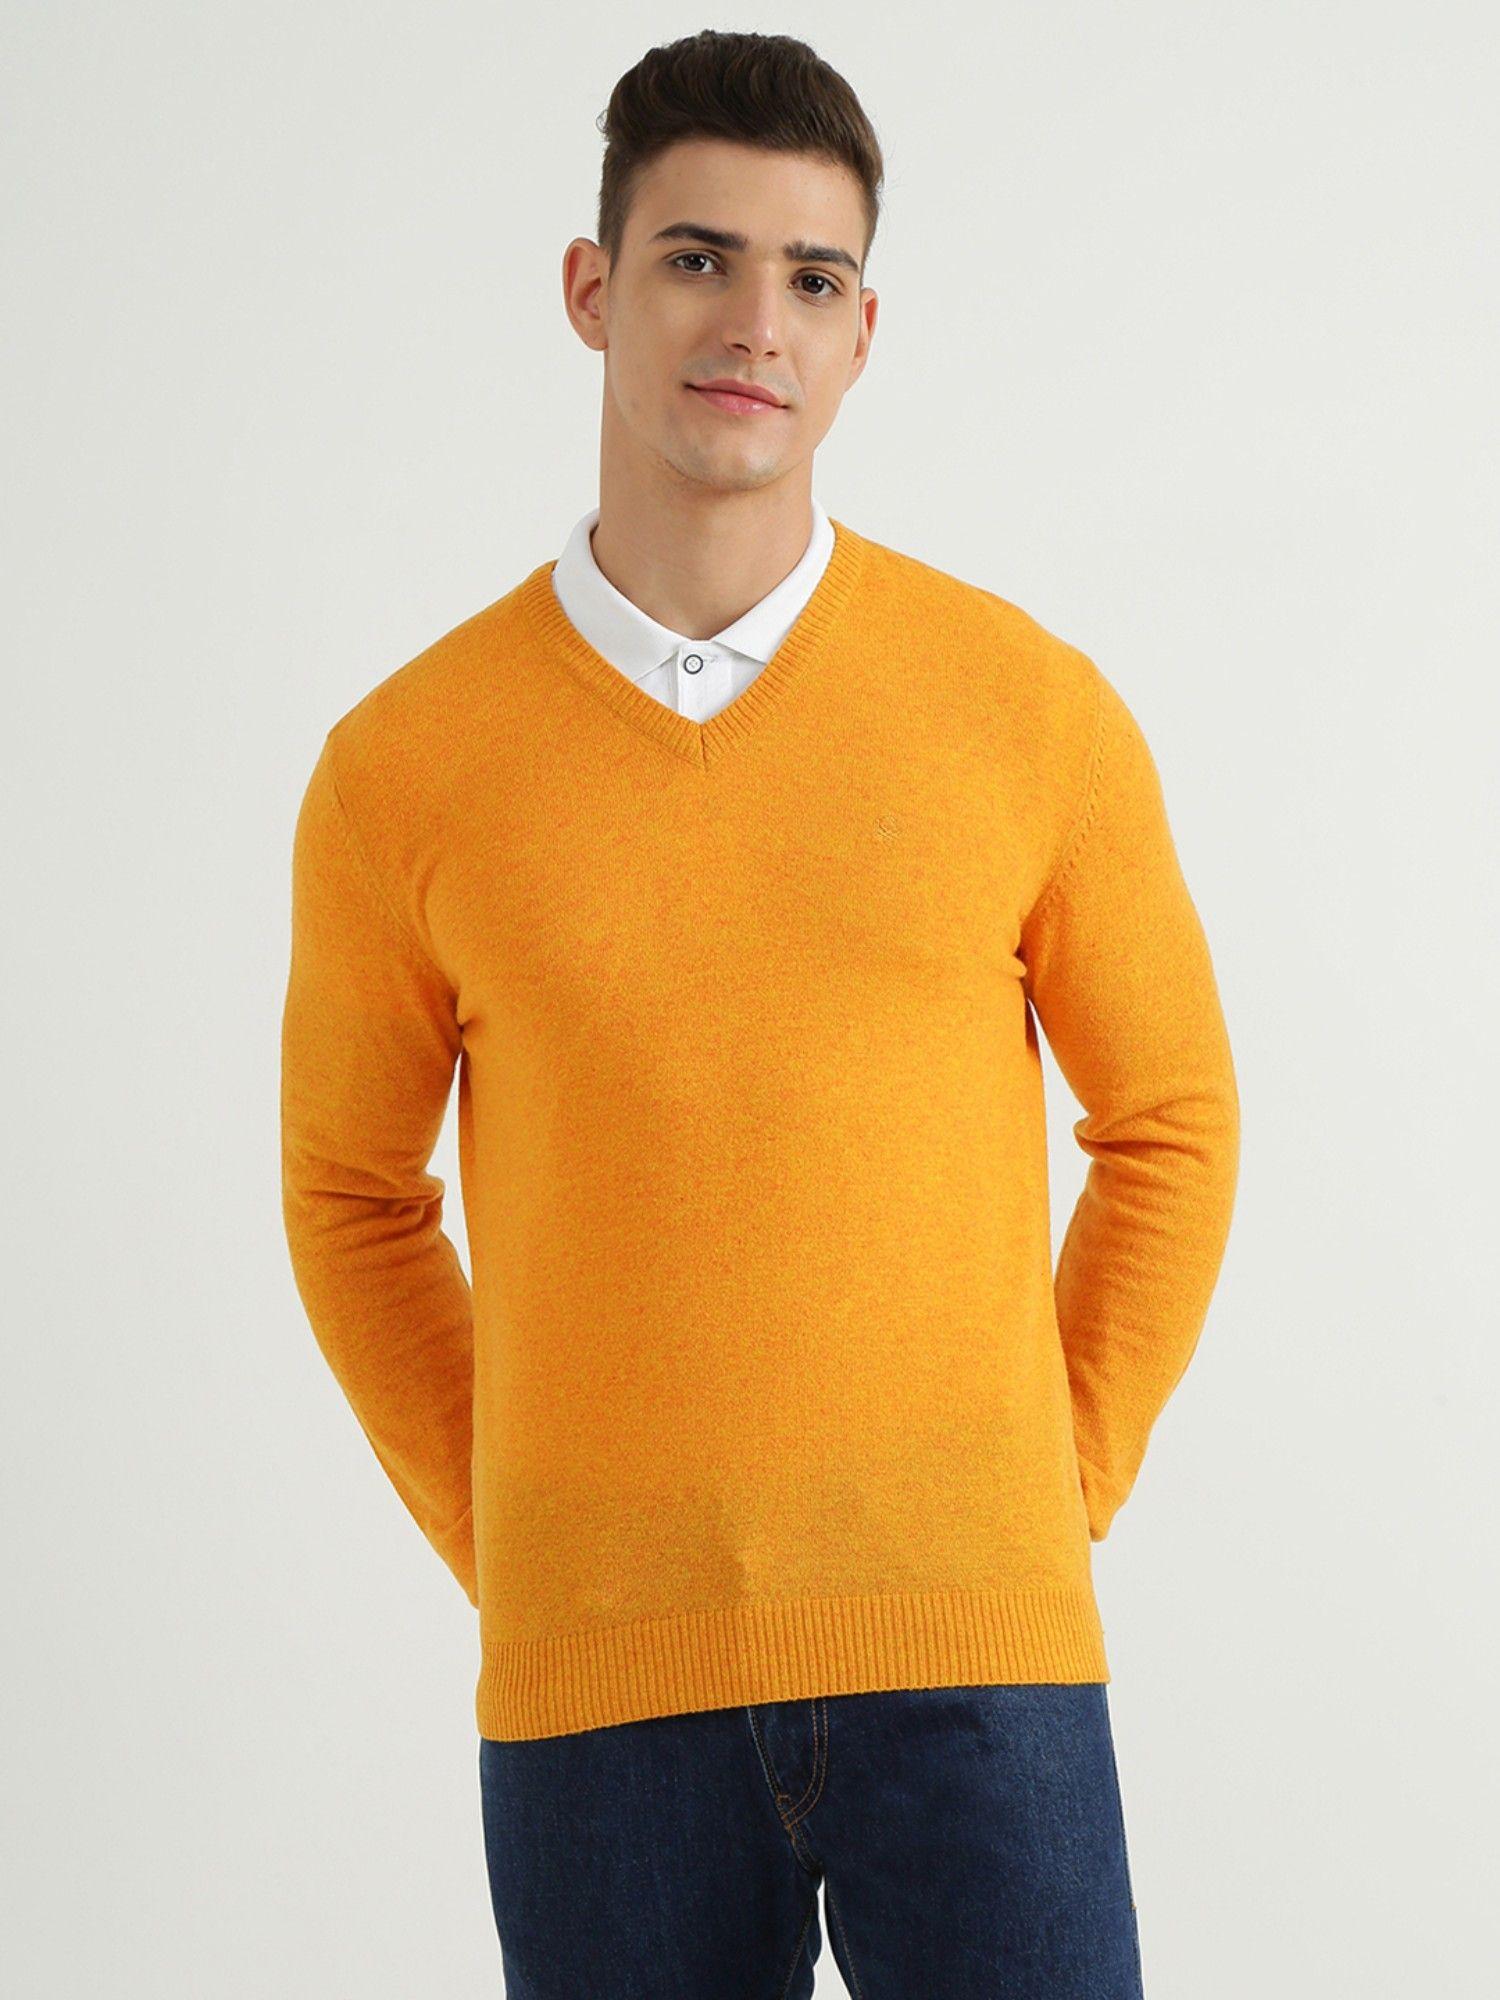 mens v-neck solid sweater yellow